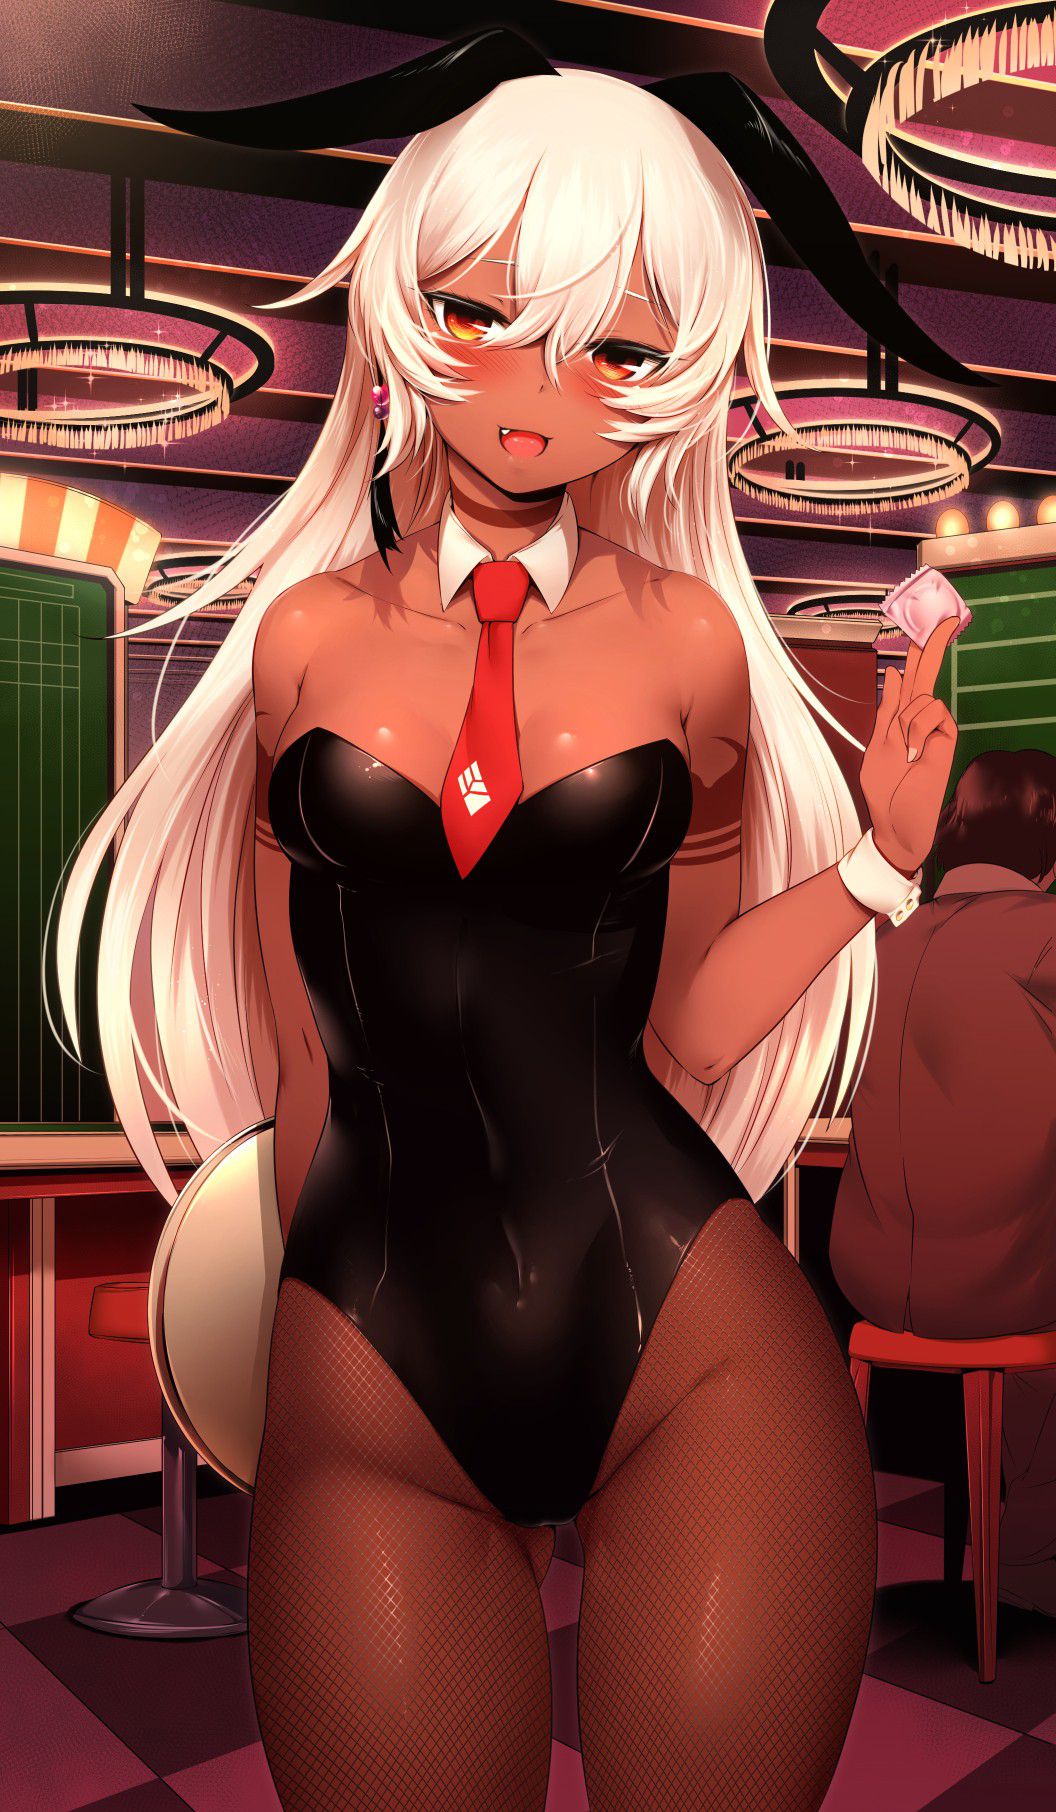 [Secondary] want to see cute images of the girl wearing a bunnysuit. 7 1